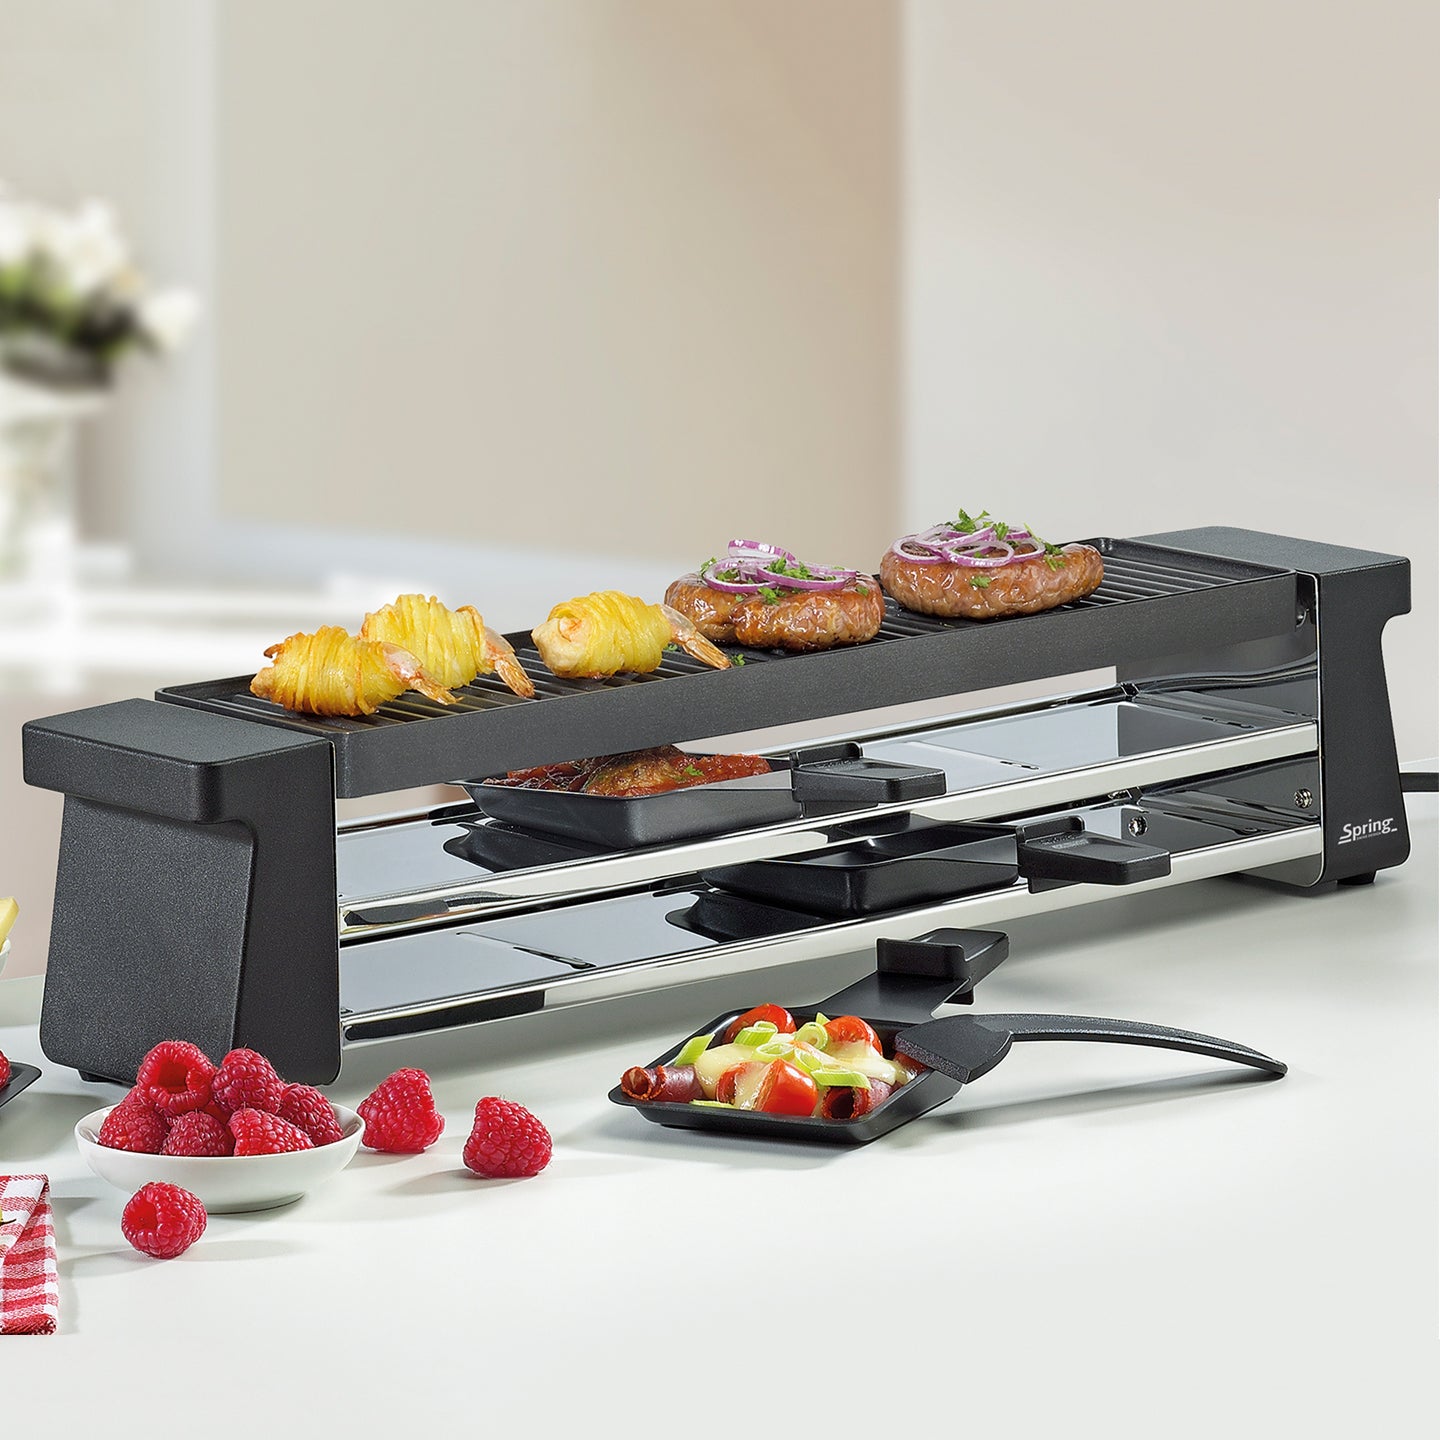 Spring Compact Raclette Grill w/Cast Aluminium Plate